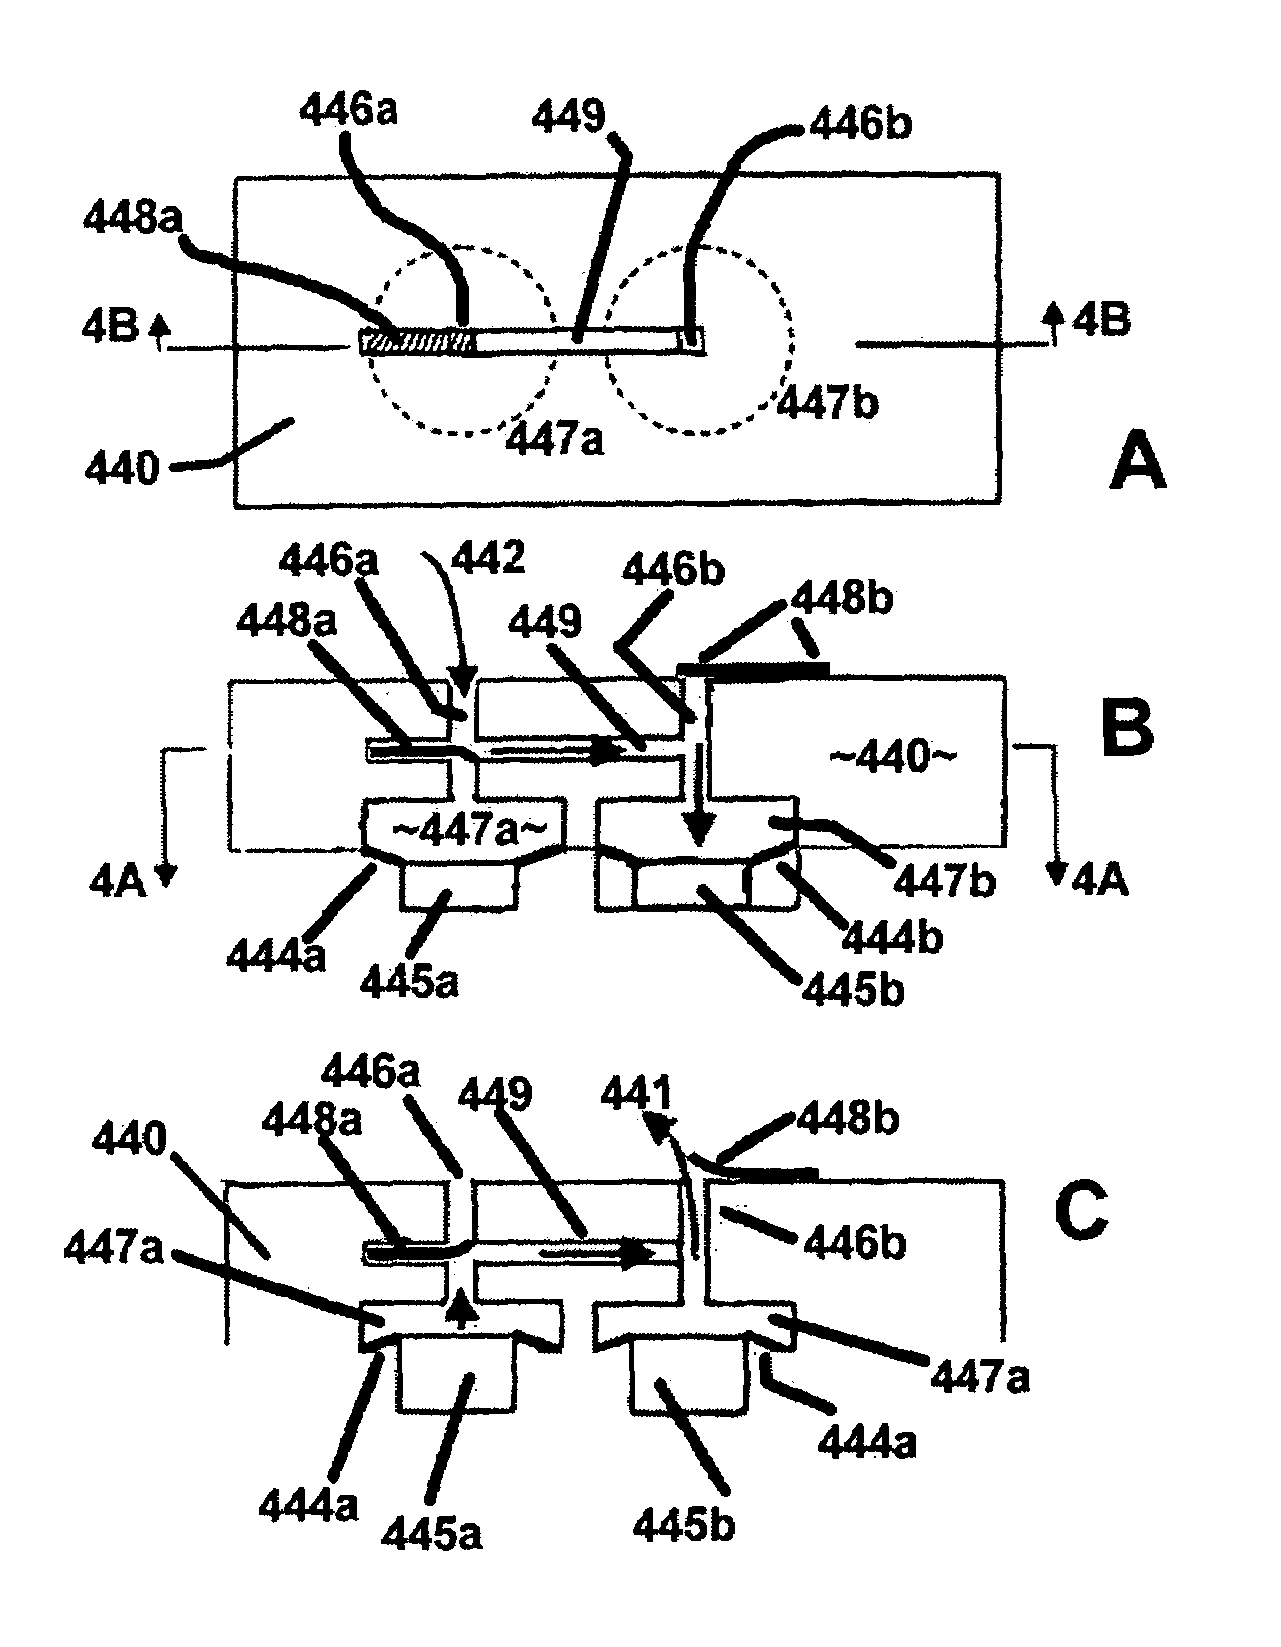 Reciprocating microfluidic pump system for chemical or biological agents